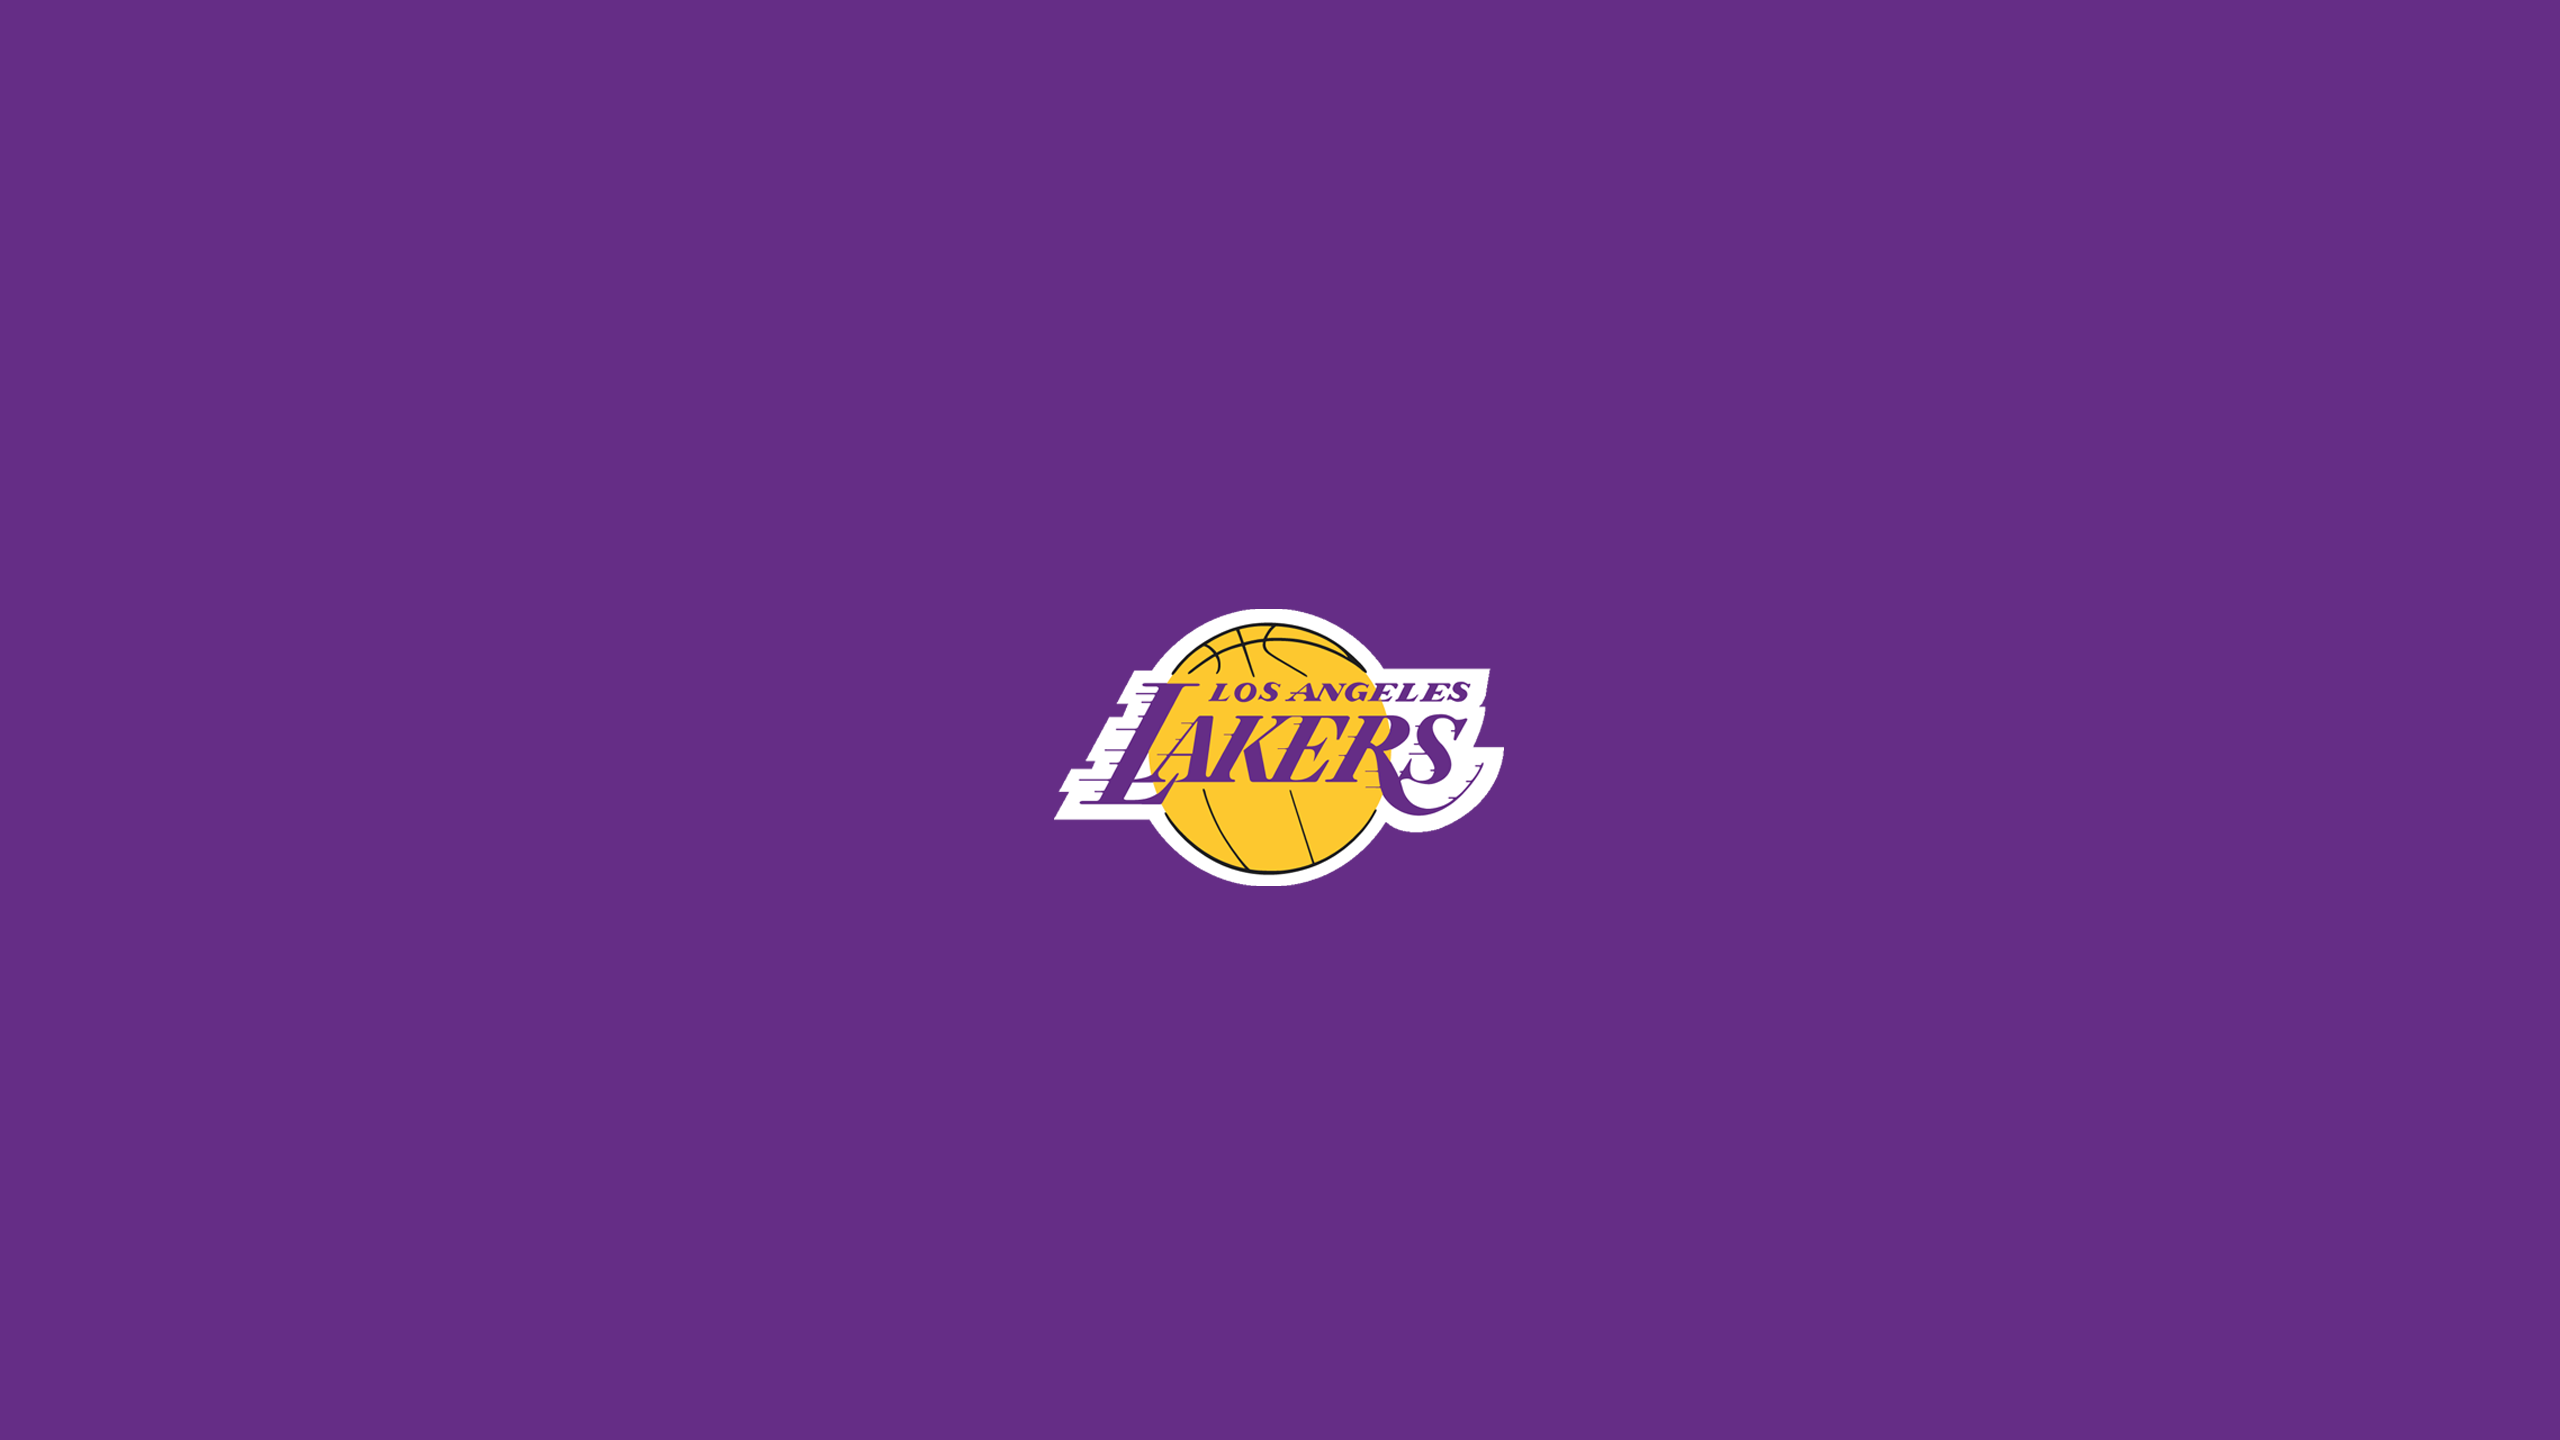 Los Angeles Lakers - Basketball - Square Bettor